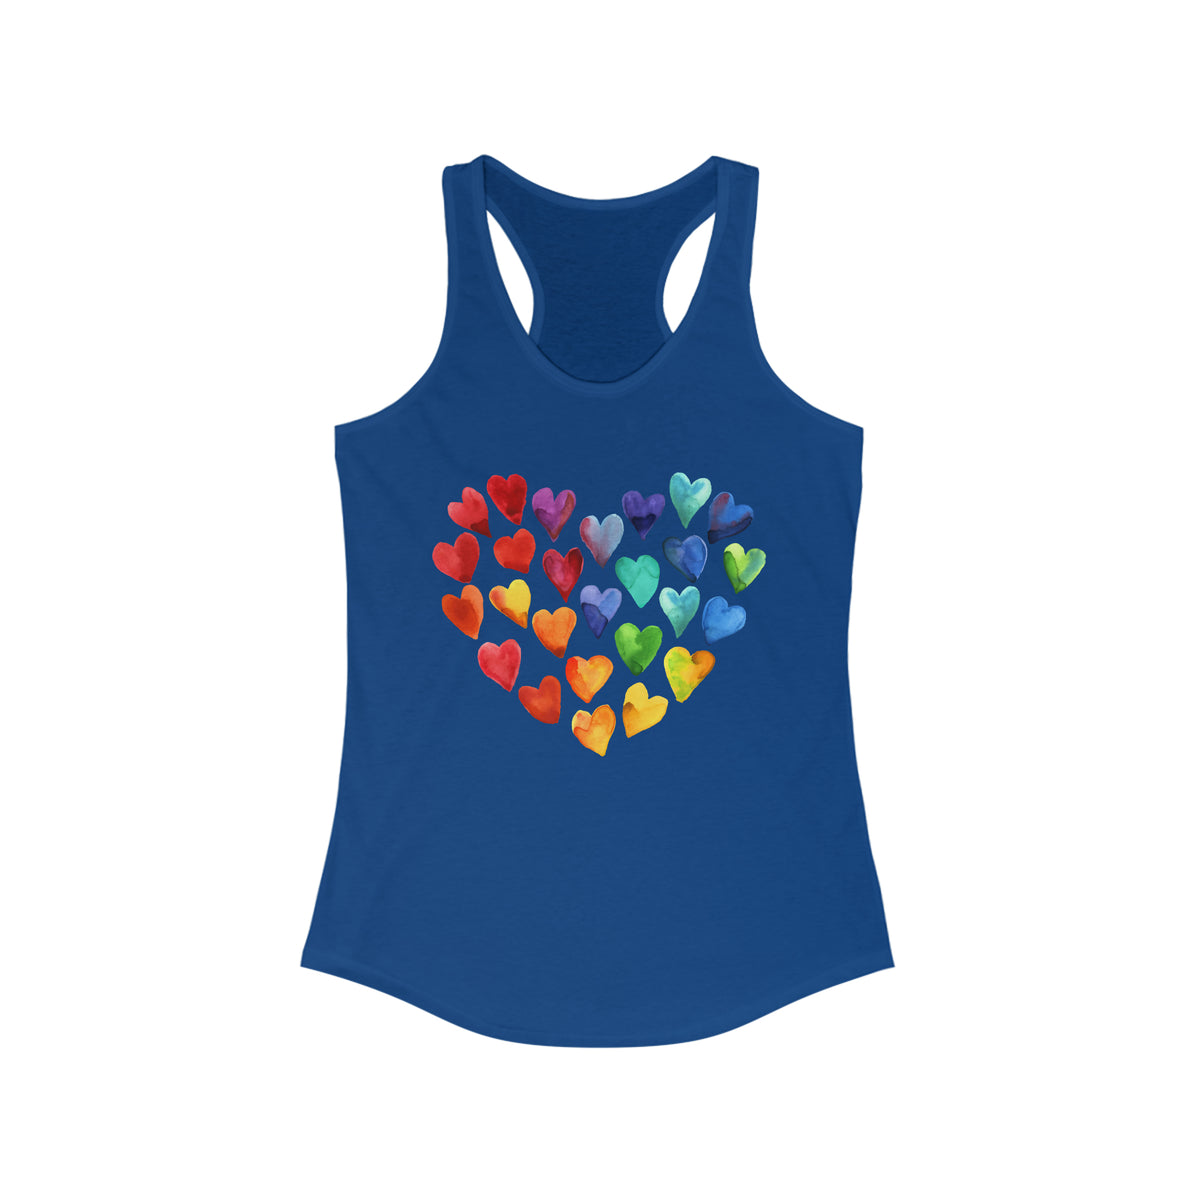 Watercolor Art Hearts Love Aesthetic Shirt | Valentine's Day Gift | Women's Ideal Racerback Tank Top